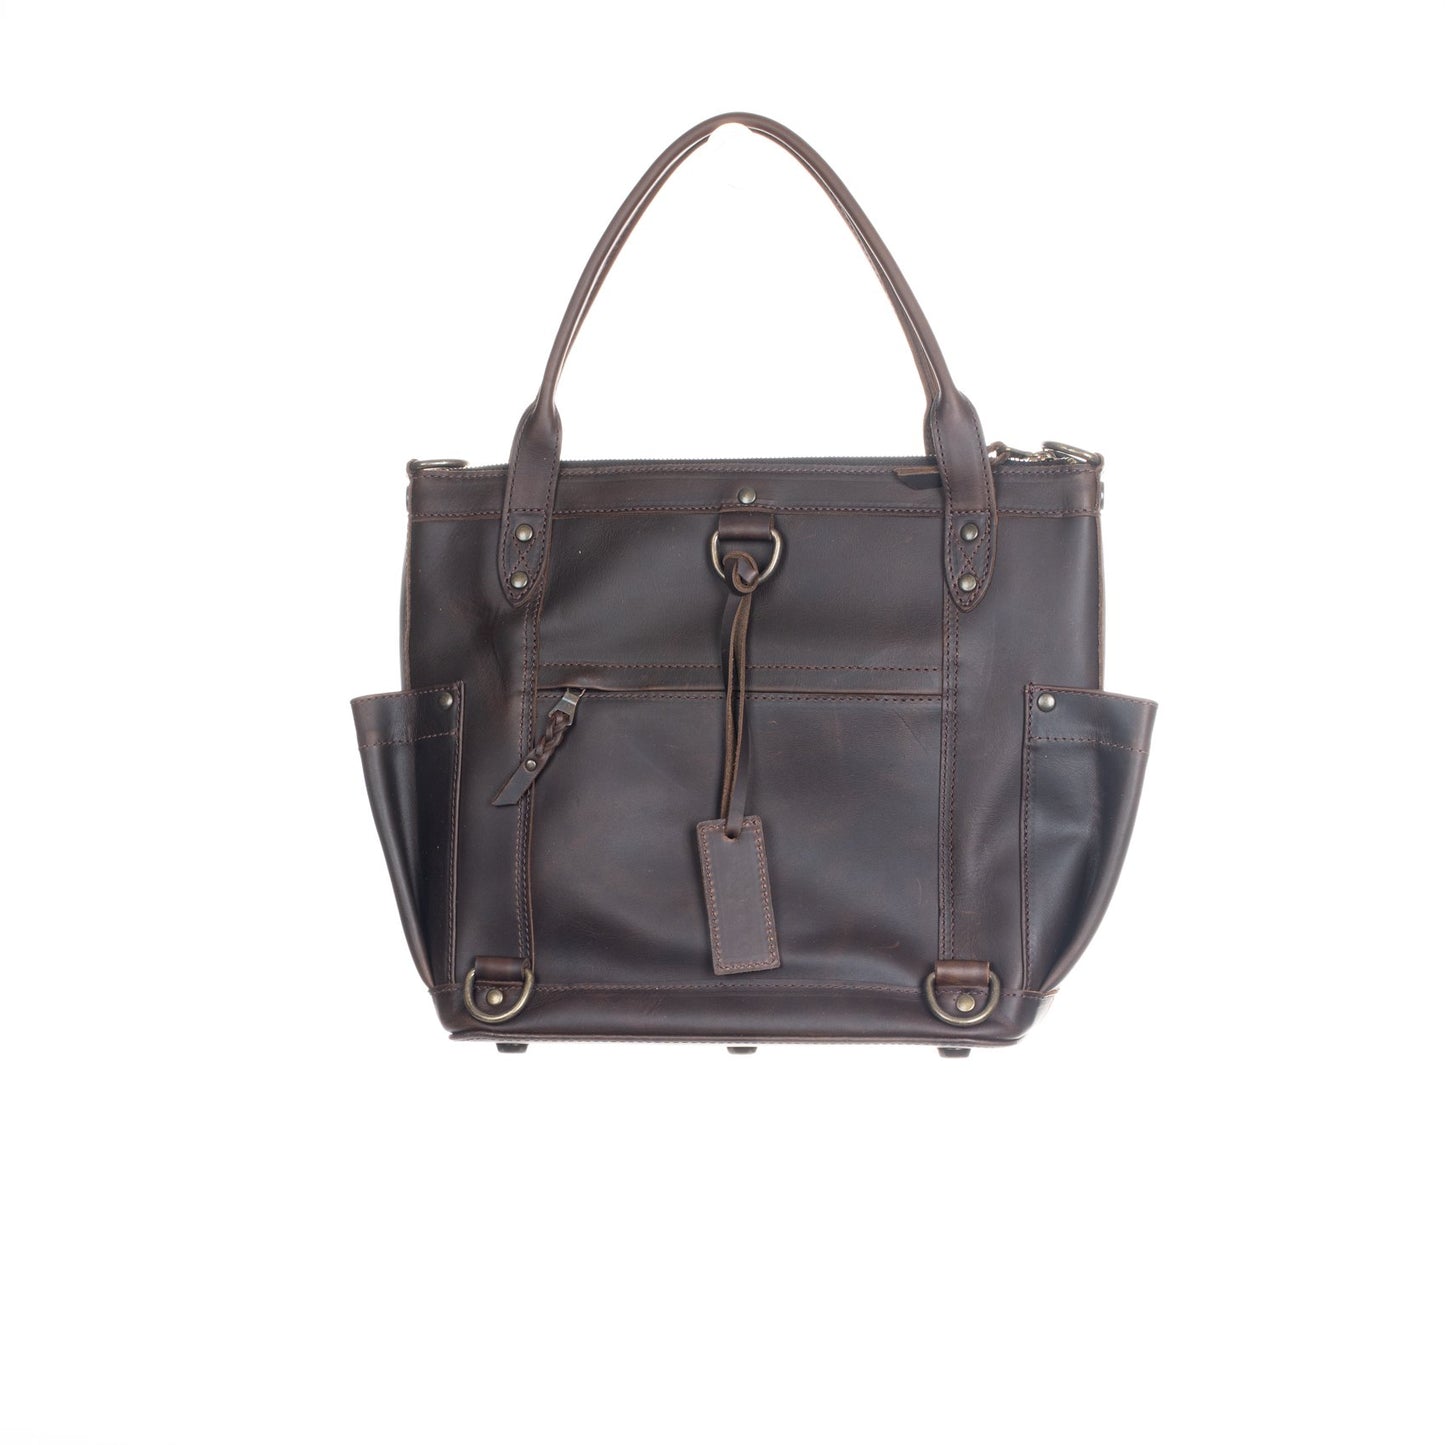 THE PERFECT BAG MEDIUM - MEXICO COLLECTION - HANDWOVEN FRONT NO. 93128 - PAINTHORSE TUMBLED LEATHER